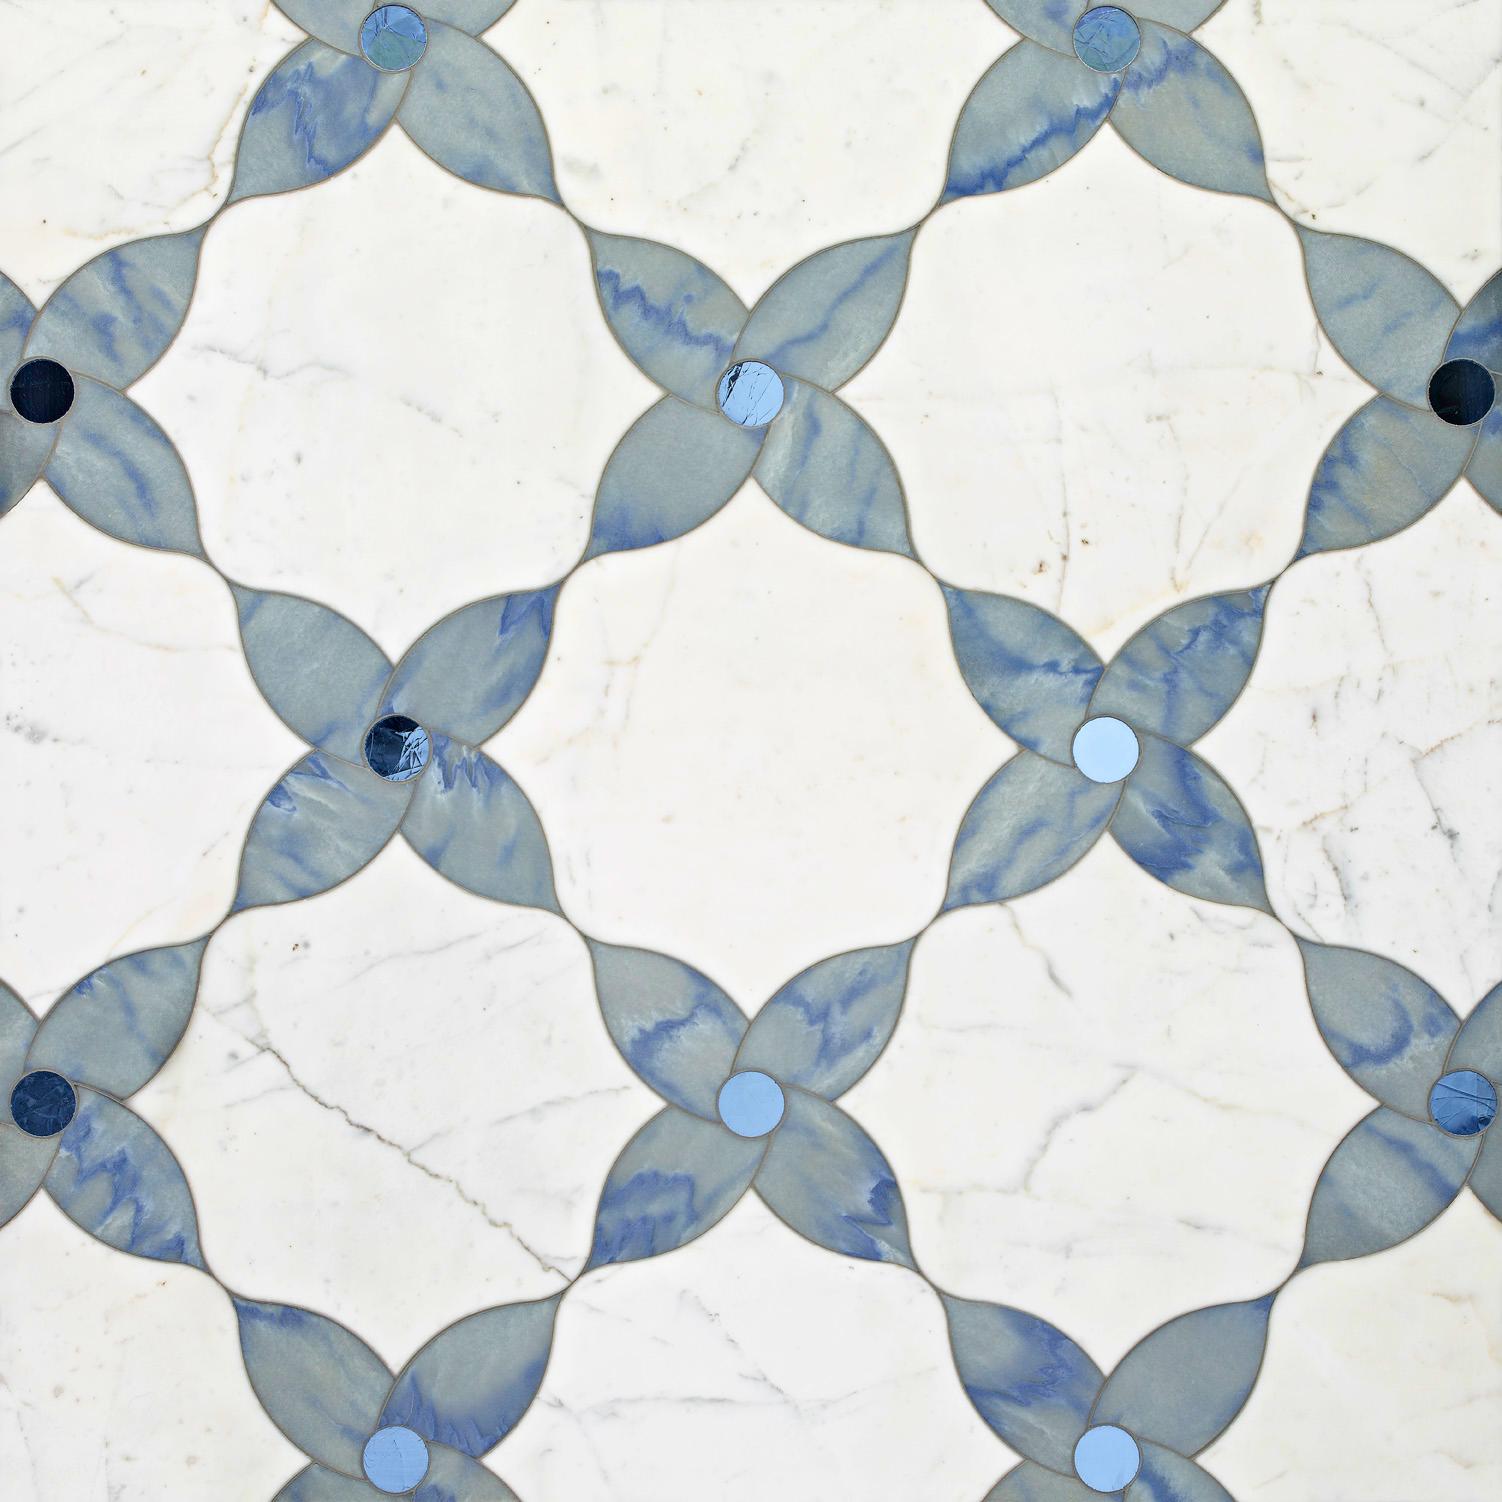 Contemporary Floor Waterjet Cut Marble Tiles Available in Different Marbles Combination For Sale